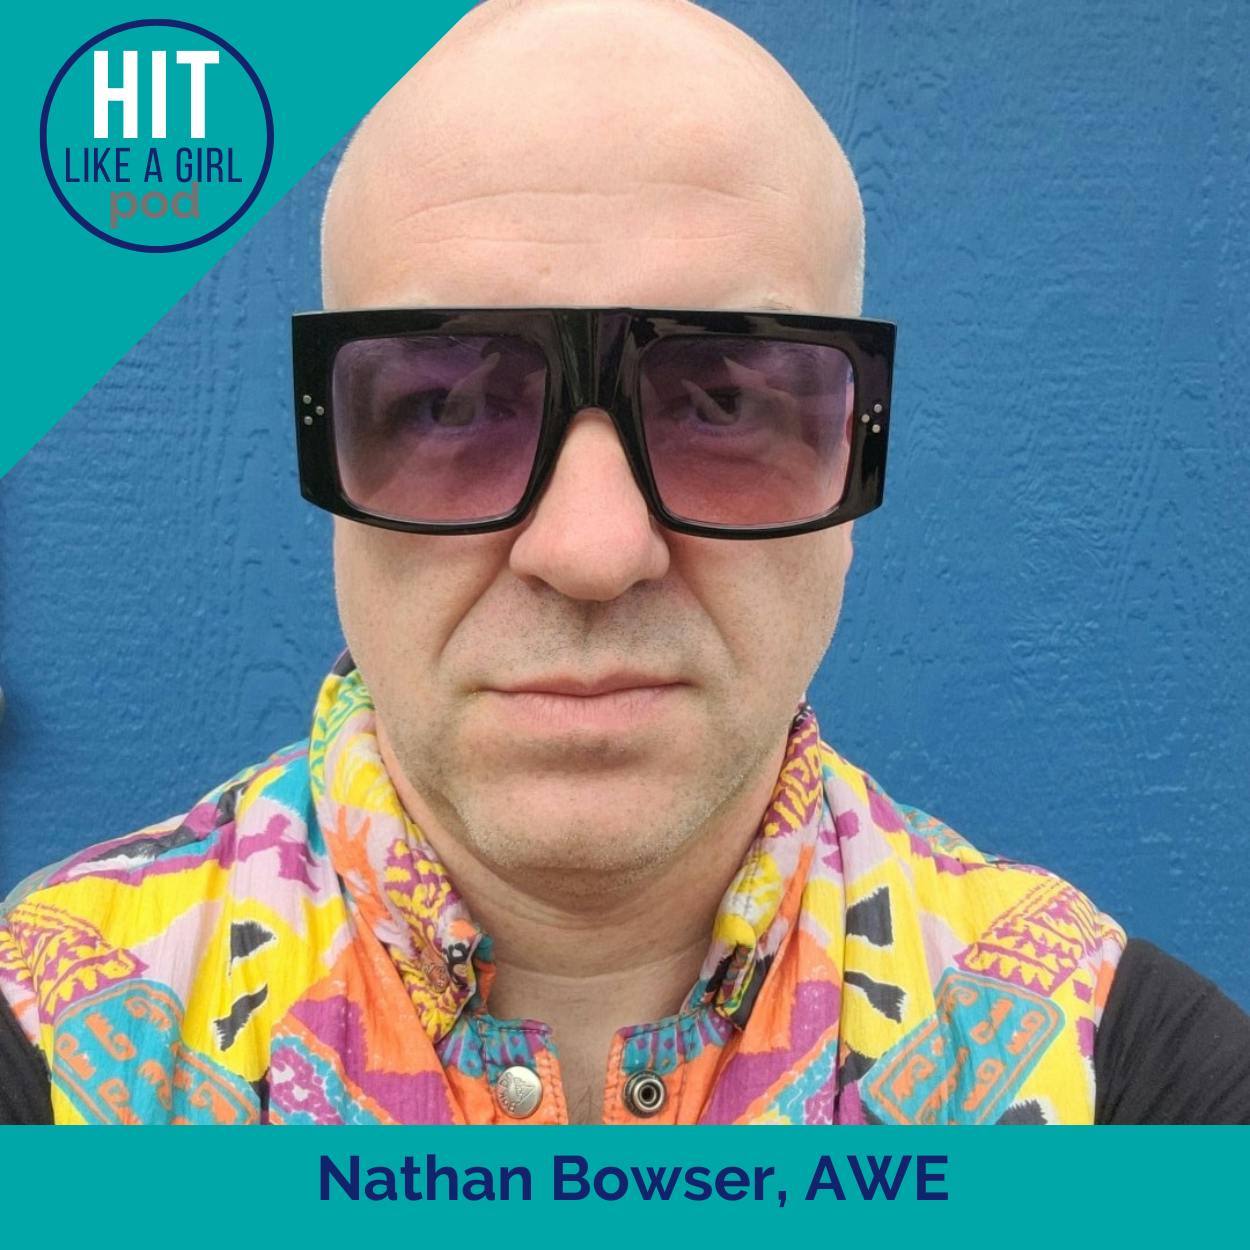 Virtual Reality Helped Nathan Bowser Understand Their Gender Identity